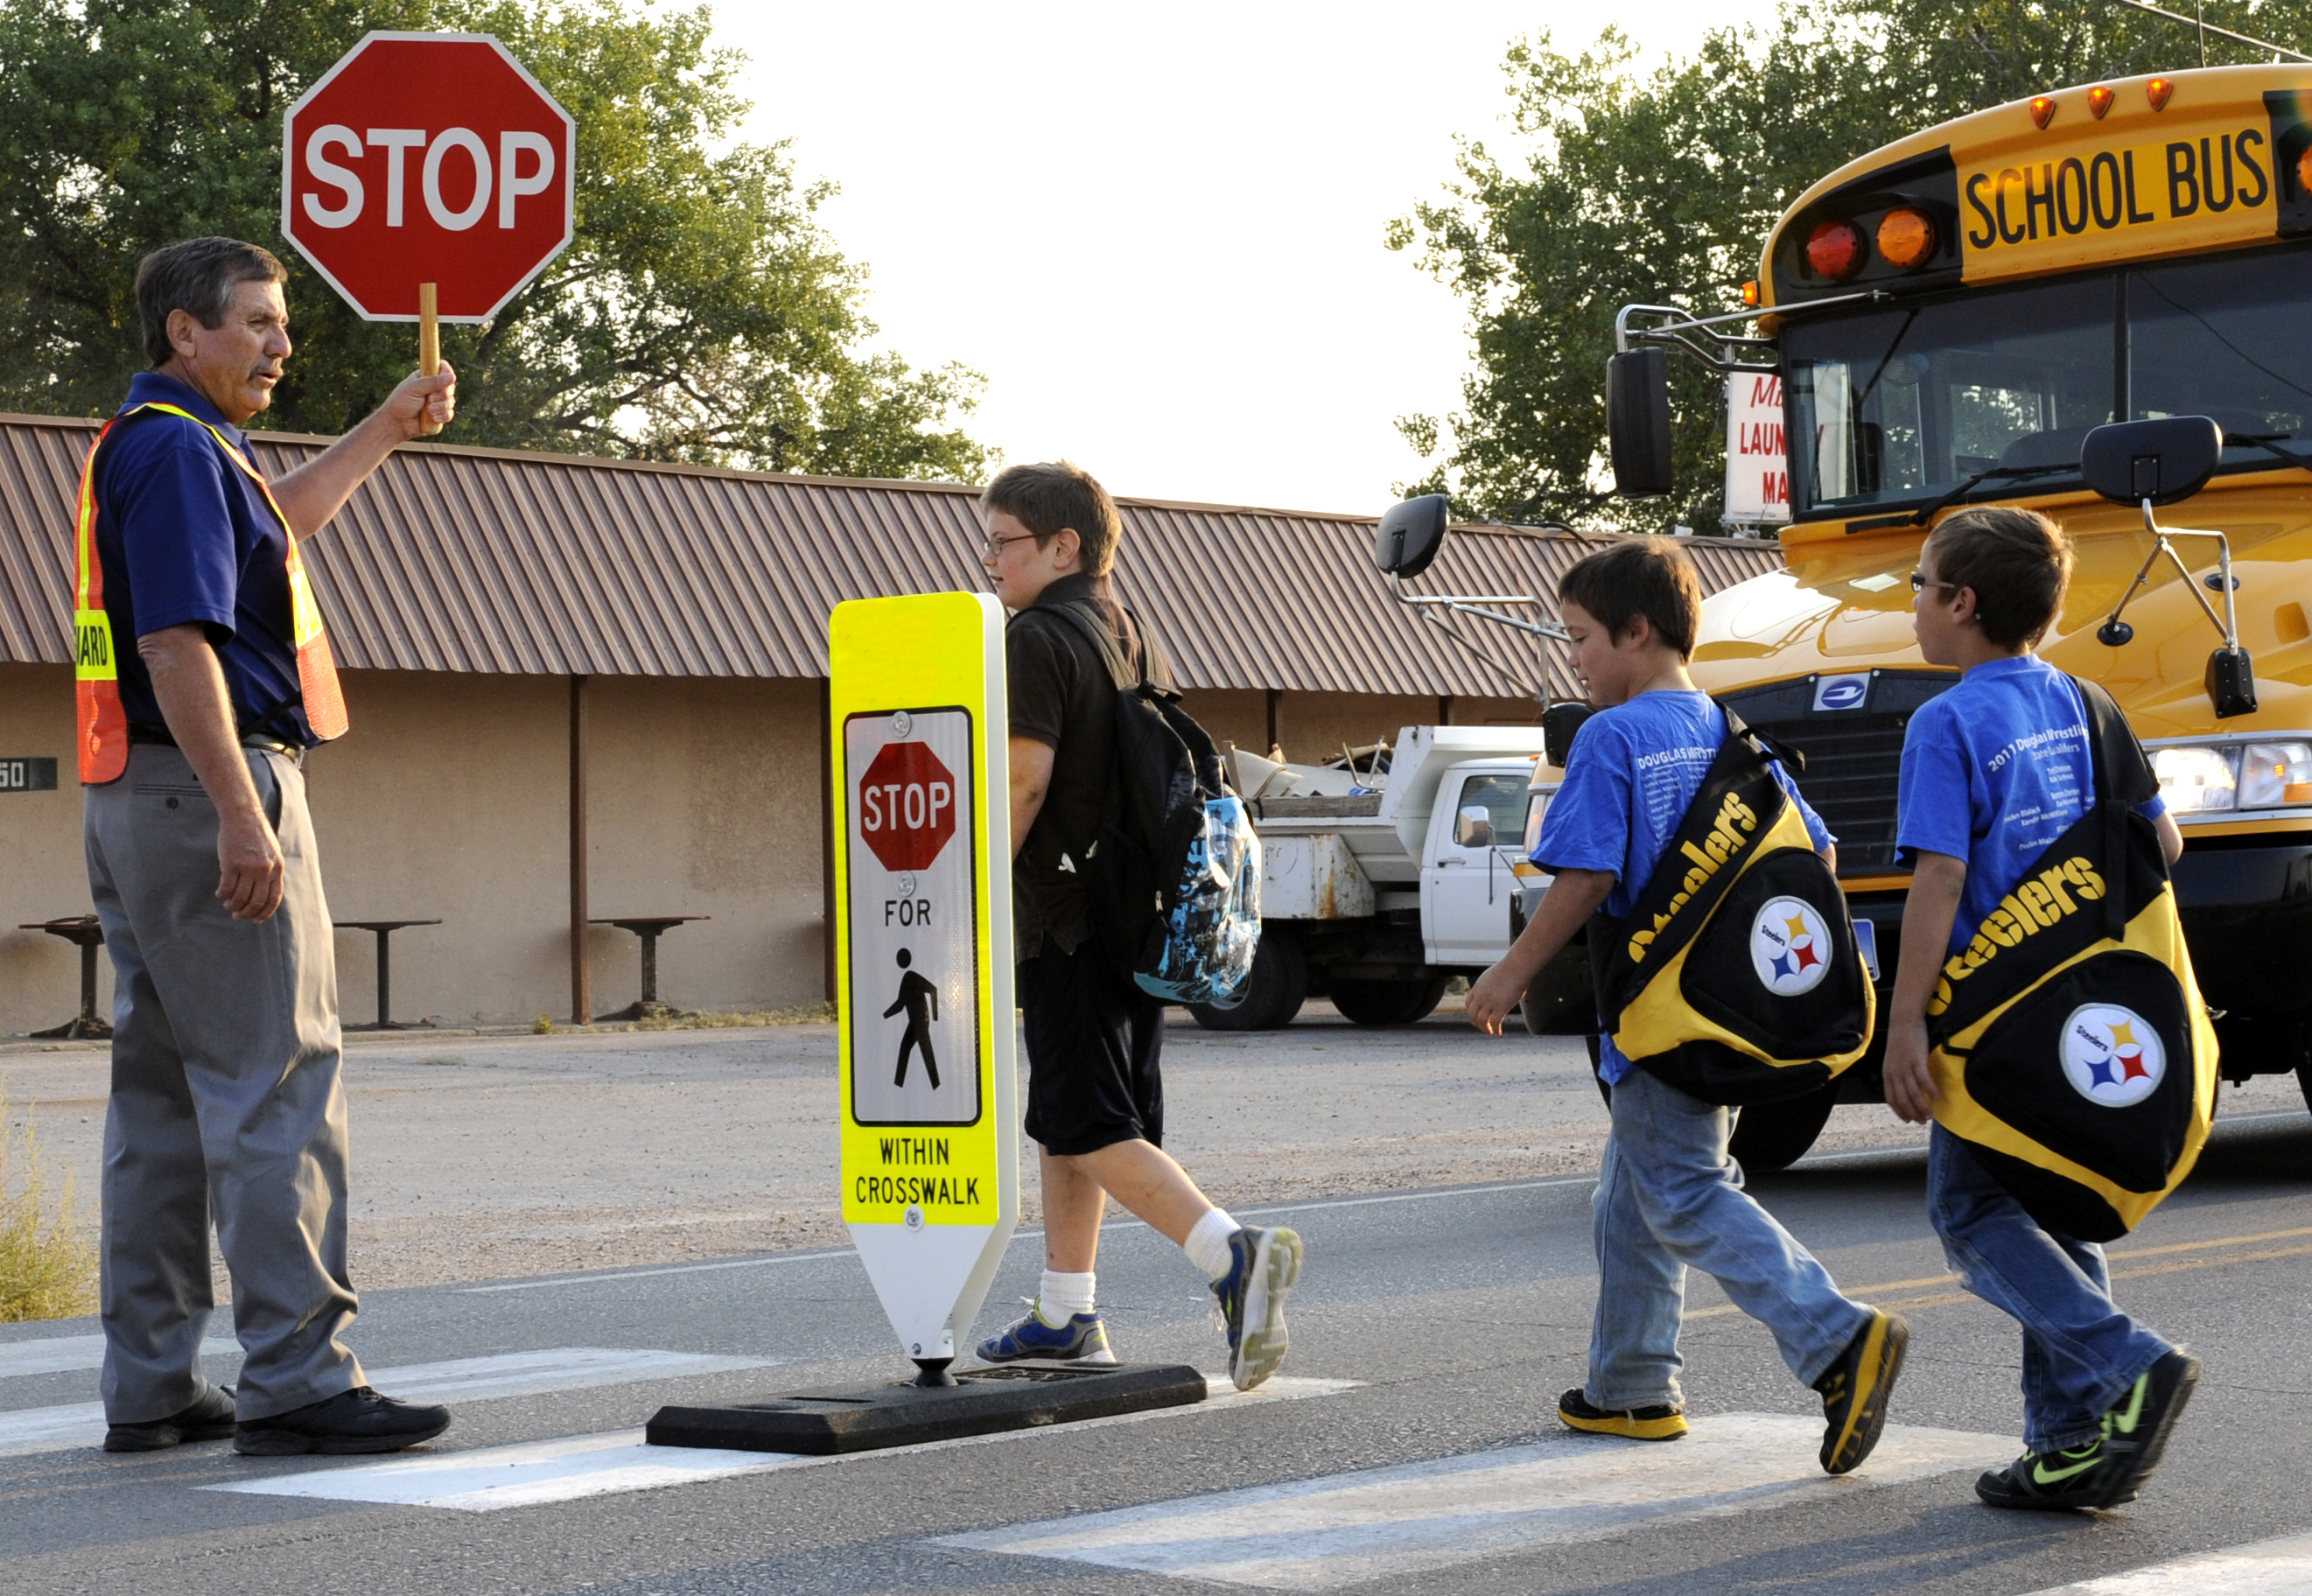 Crossing guard and children